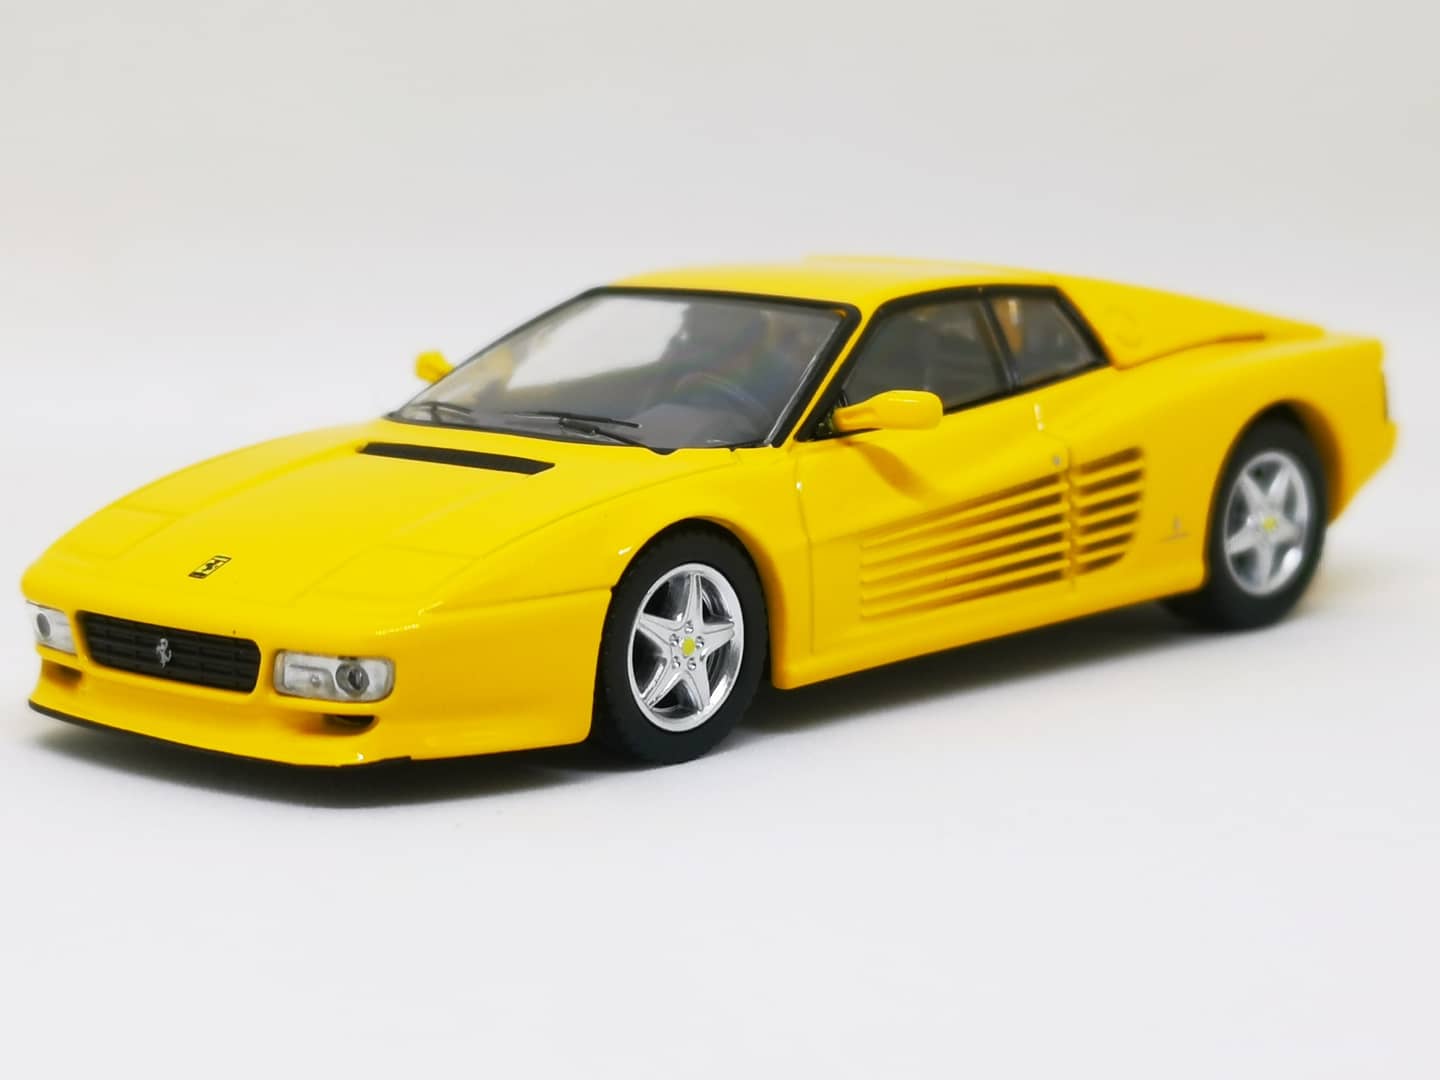 Tomica Limited Vintage Neo
Ferrari 512TR web store exclusive